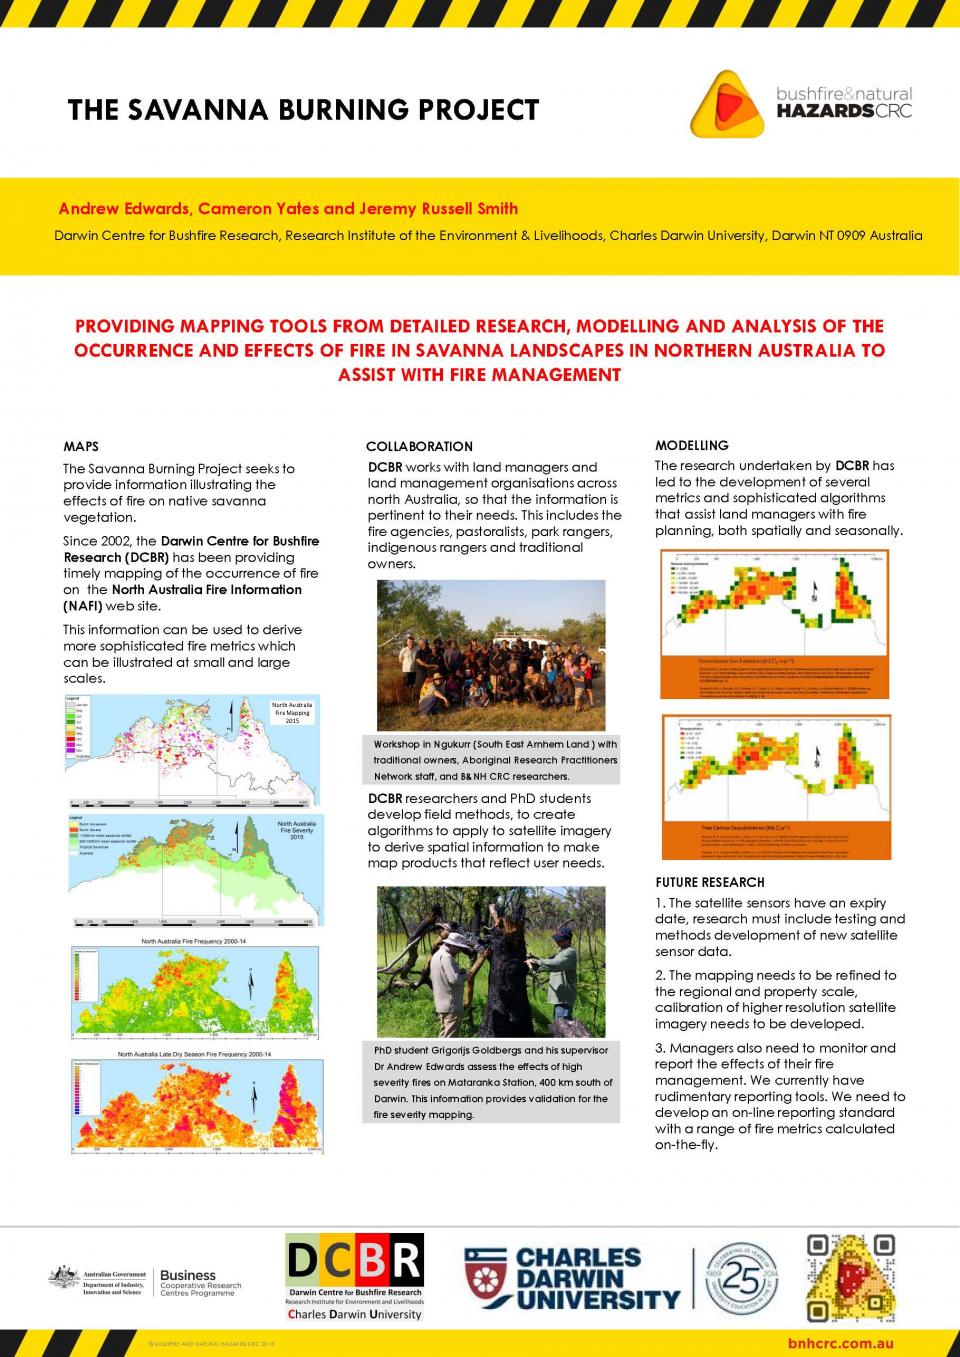 Andrew Edwards Conference Poster 2016